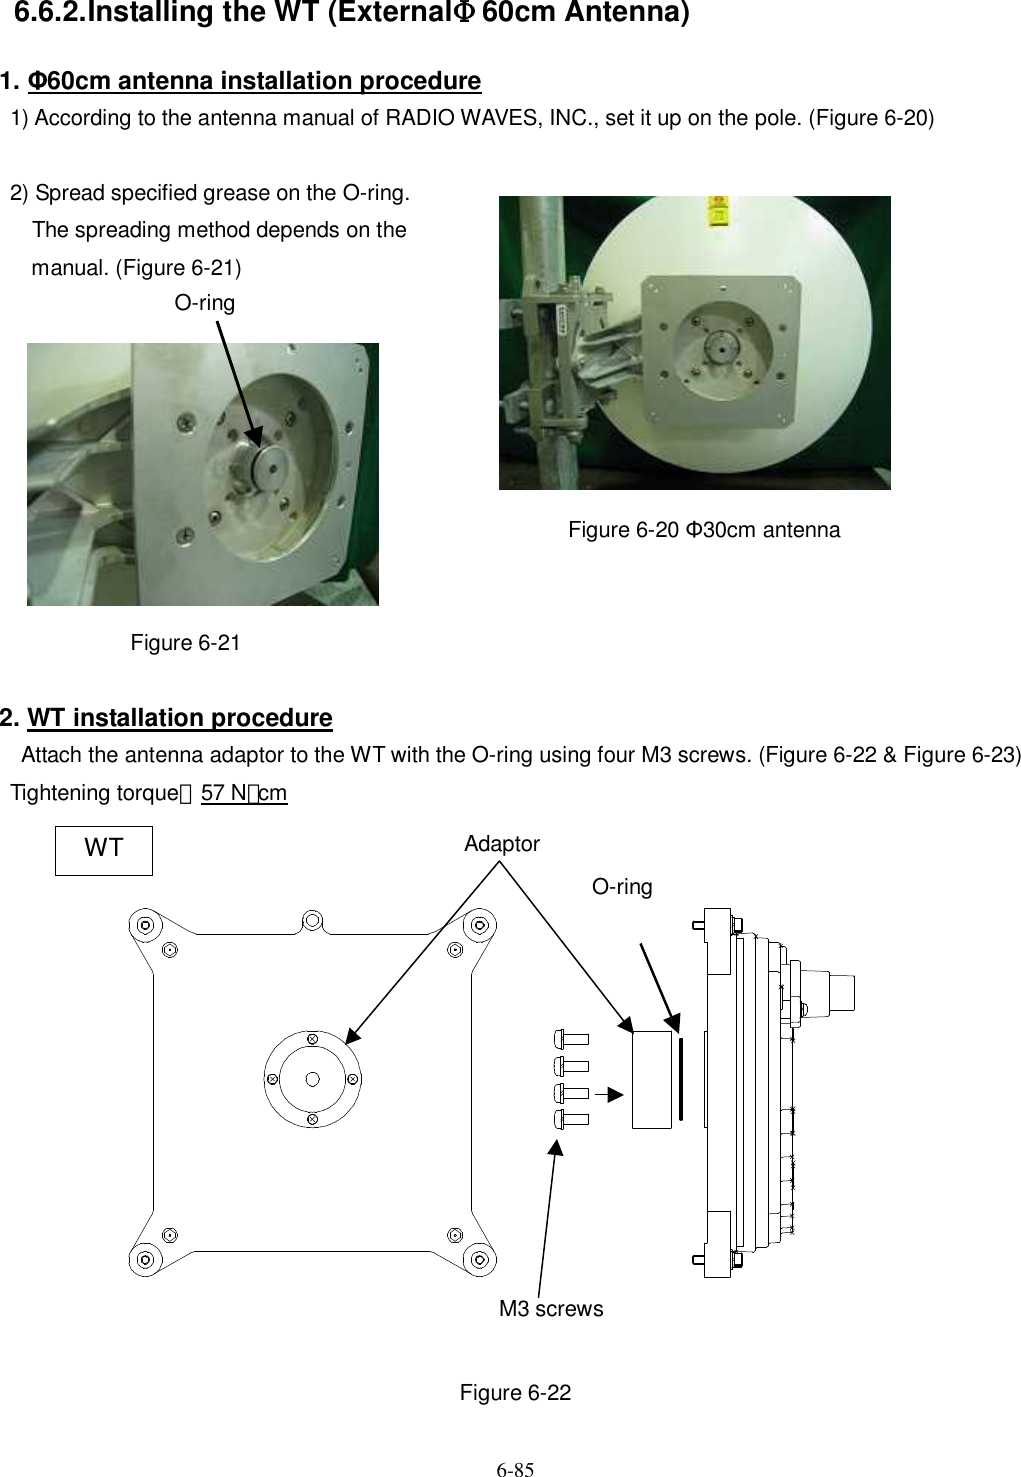   6-85   6.6.2. Installing the WT (ExternalΦ60cm Antenna) 1. Φ60cm antenna installation procedure 1) According to the antenna manual of RADIO WAVES, INC., set it up on the pole. (Figure 6-20)    2) Spread specified grease on the O-ring.       The spreading method depends on the   manual. (Figure 6-21)                                                Figure 6-20 Φ30cm antenna            Figure 6-21      2. WT installation procedure   Attach the antenna adaptor to the WT with the O-ring using four M3 screws. (Figure 6-22 &amp; Figure 6-23)   Tightening torque：57 N･cm                    Figure 6-22 M3 screws O-ring Adaptor WT O-ring 